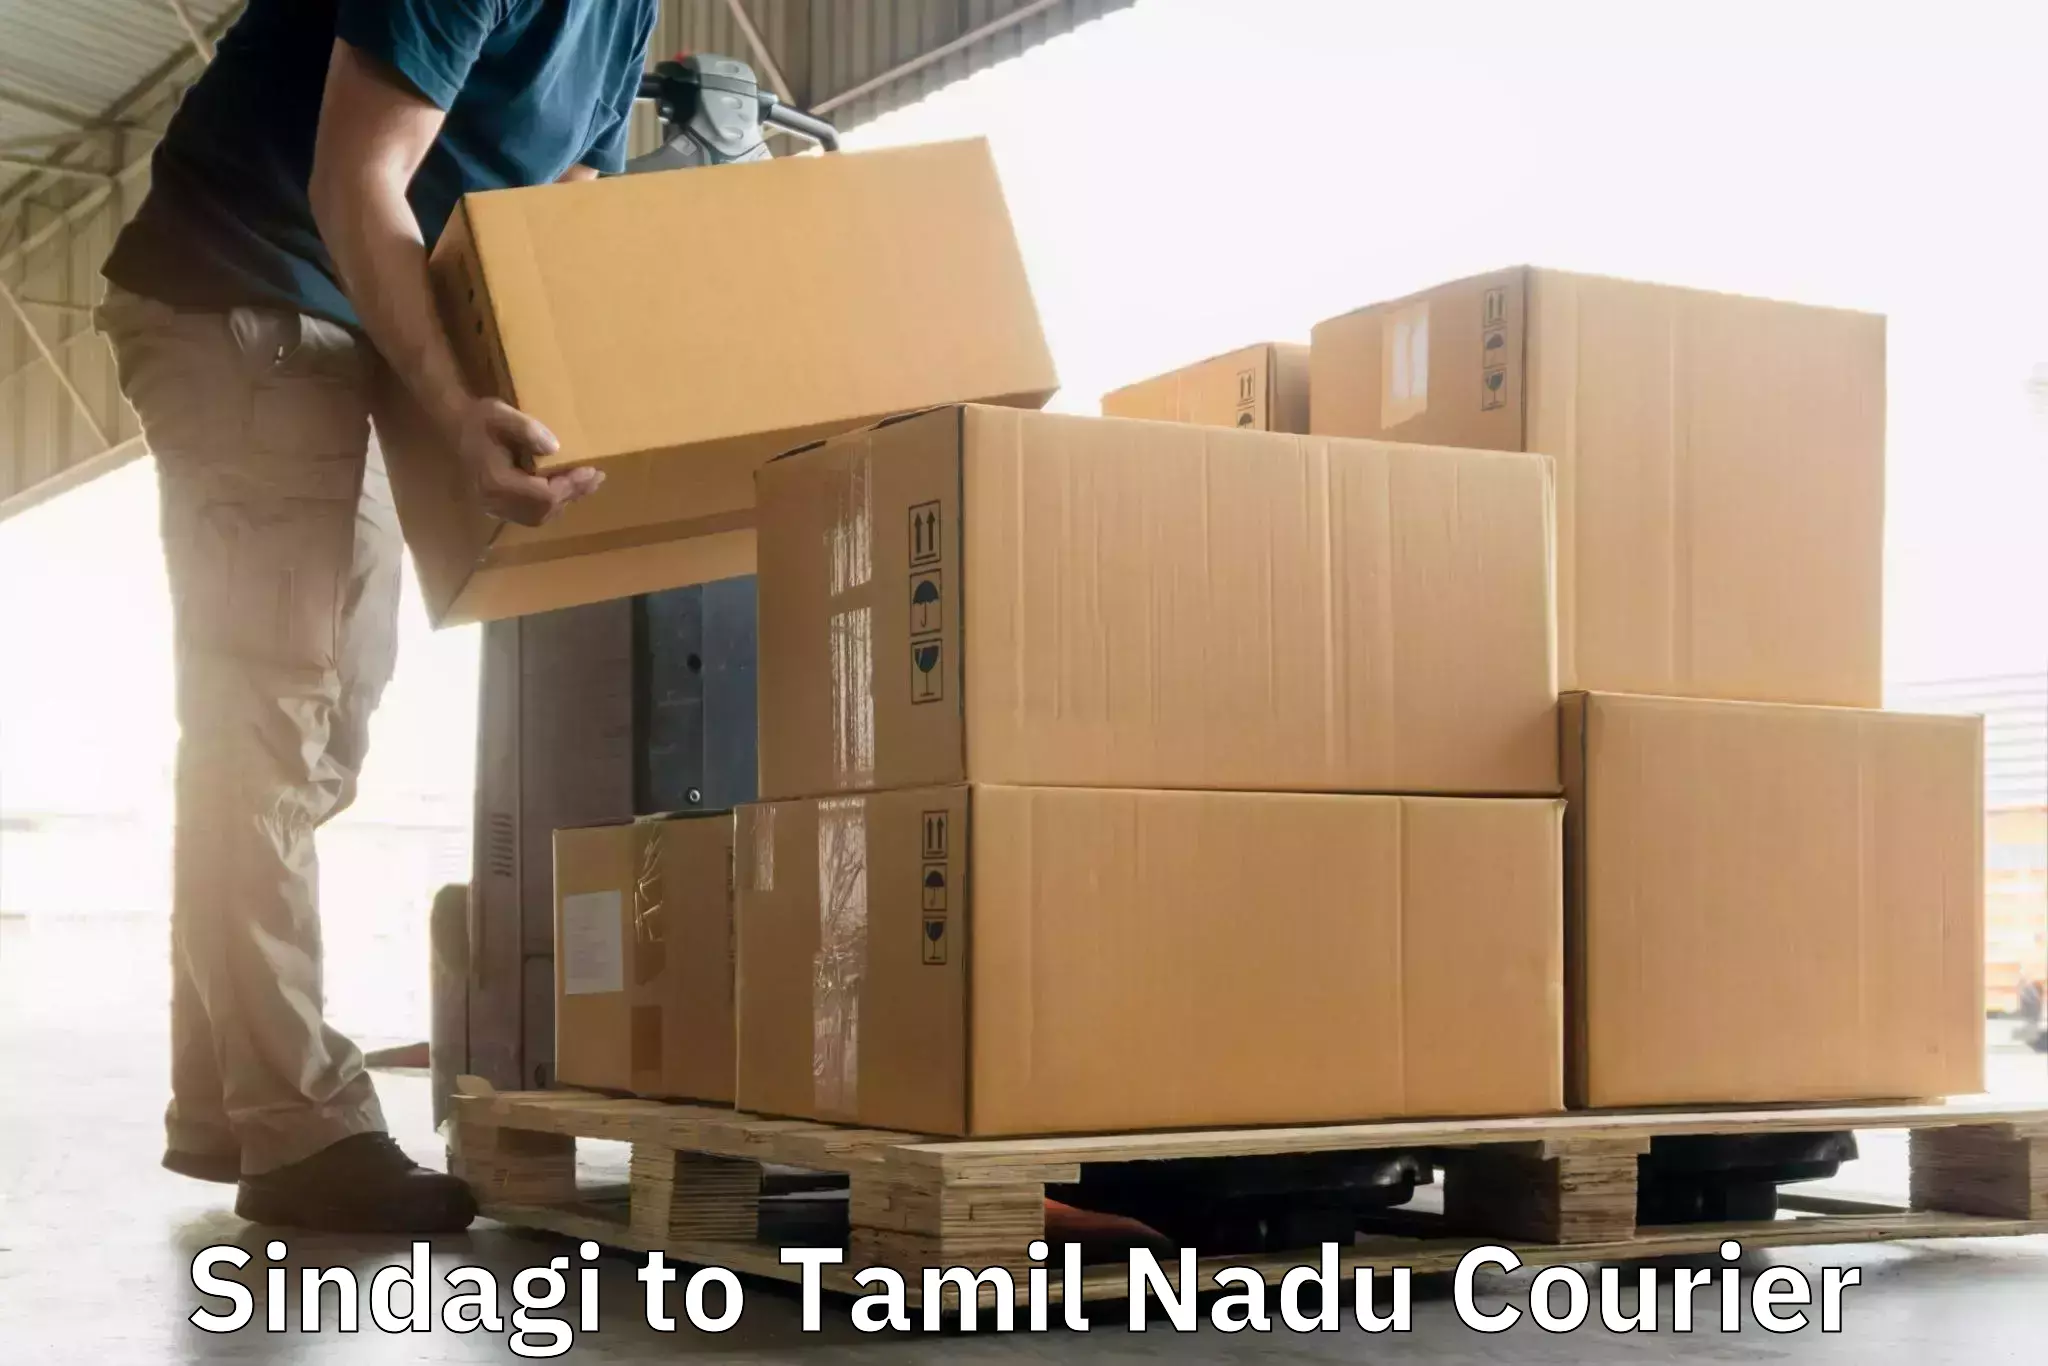 State-of-the-art courier technology in Sindagi to Tamil Nadu